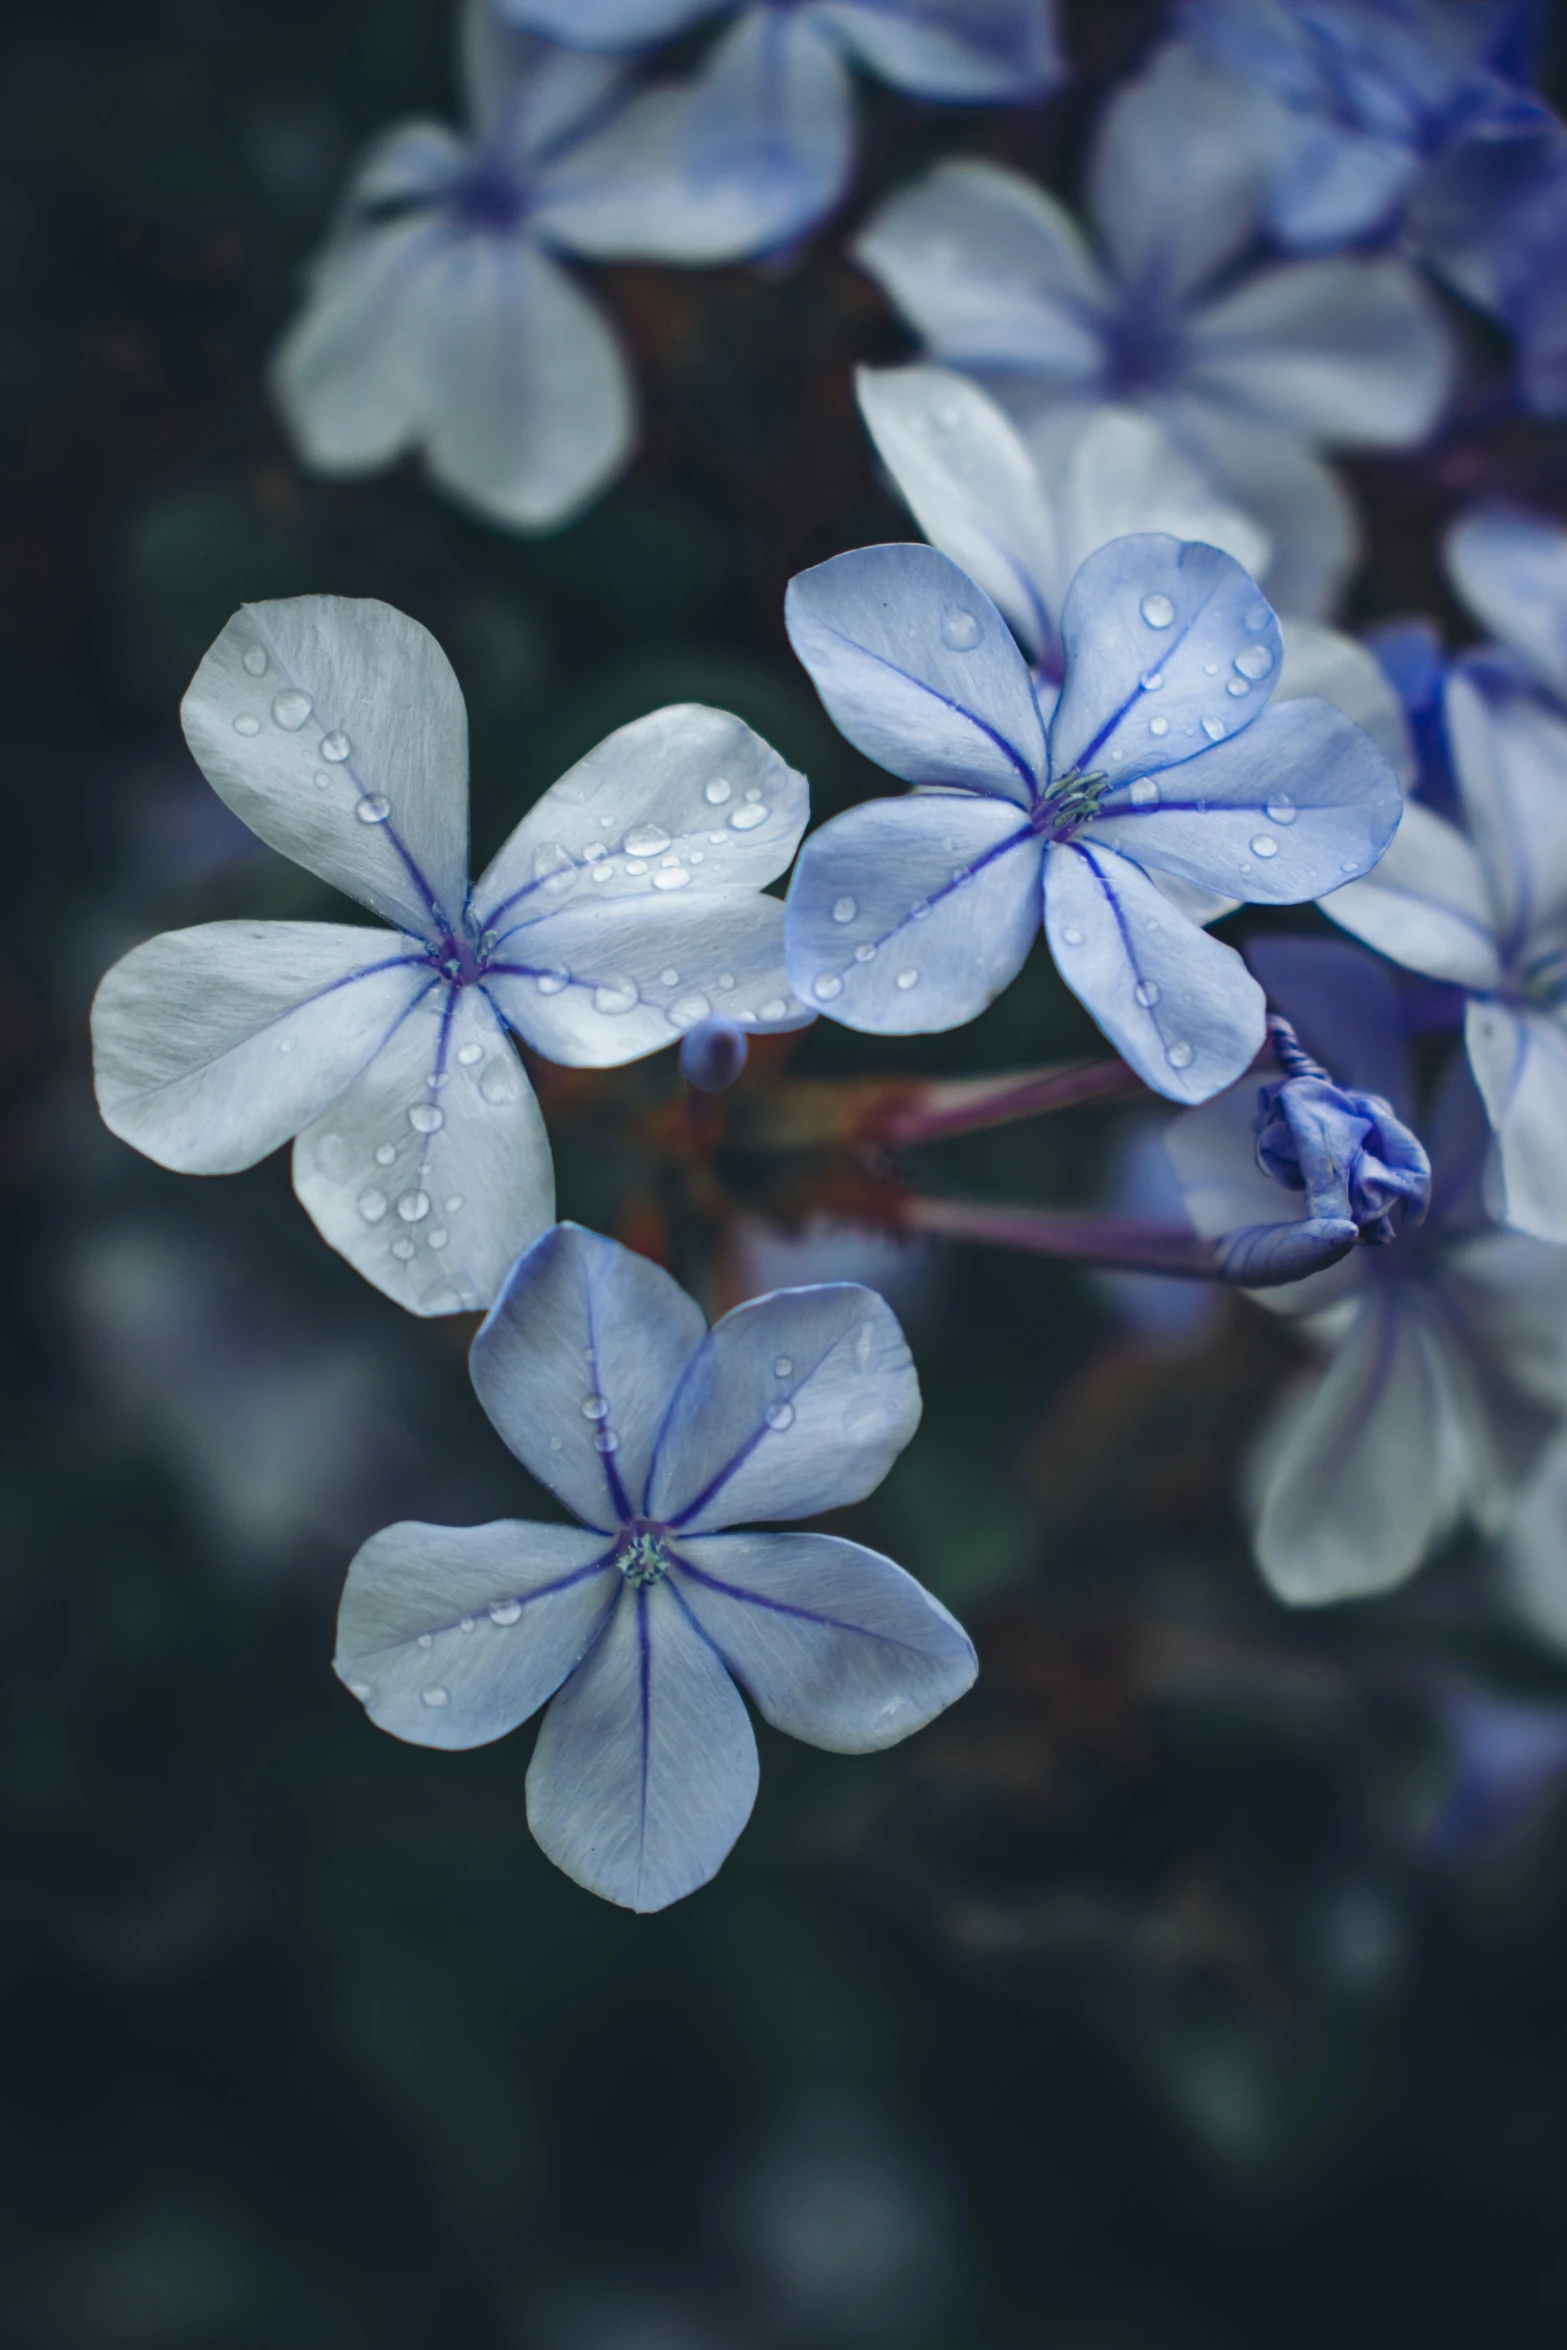 there are several blue flowers with water drops